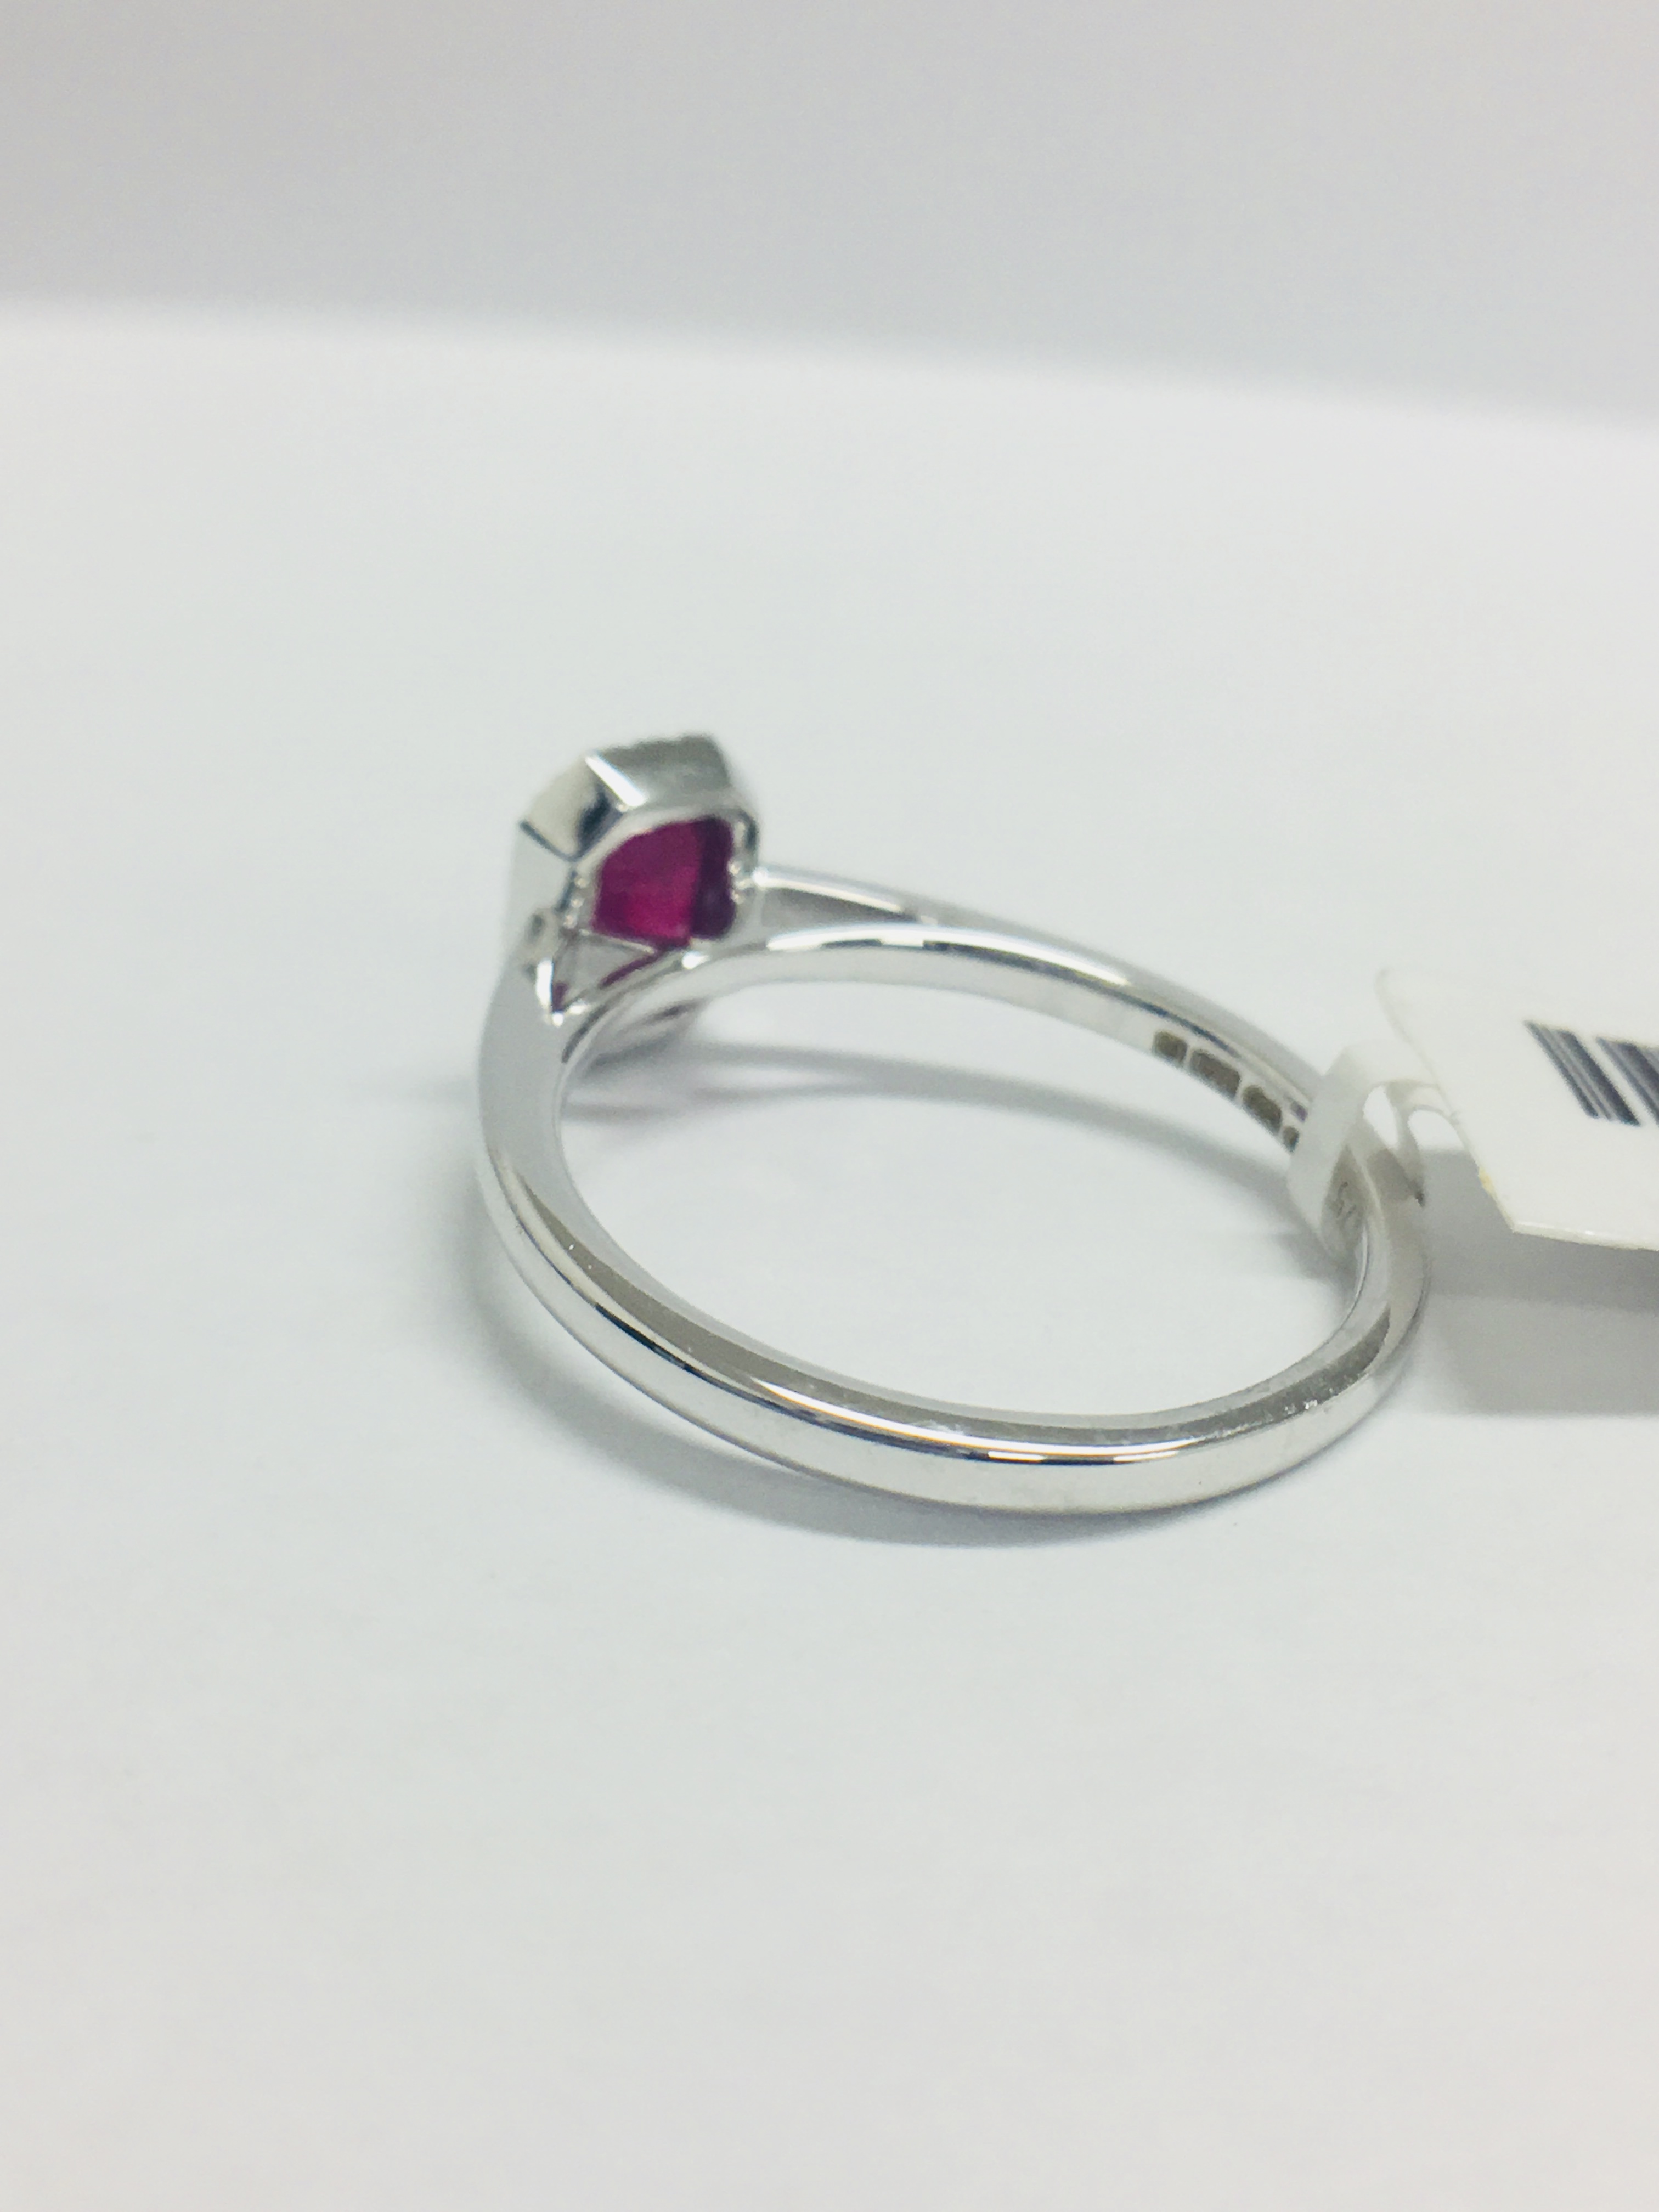 9Ct White Gold Ruby Diamond Cluster Ring, - Image 4 of 7